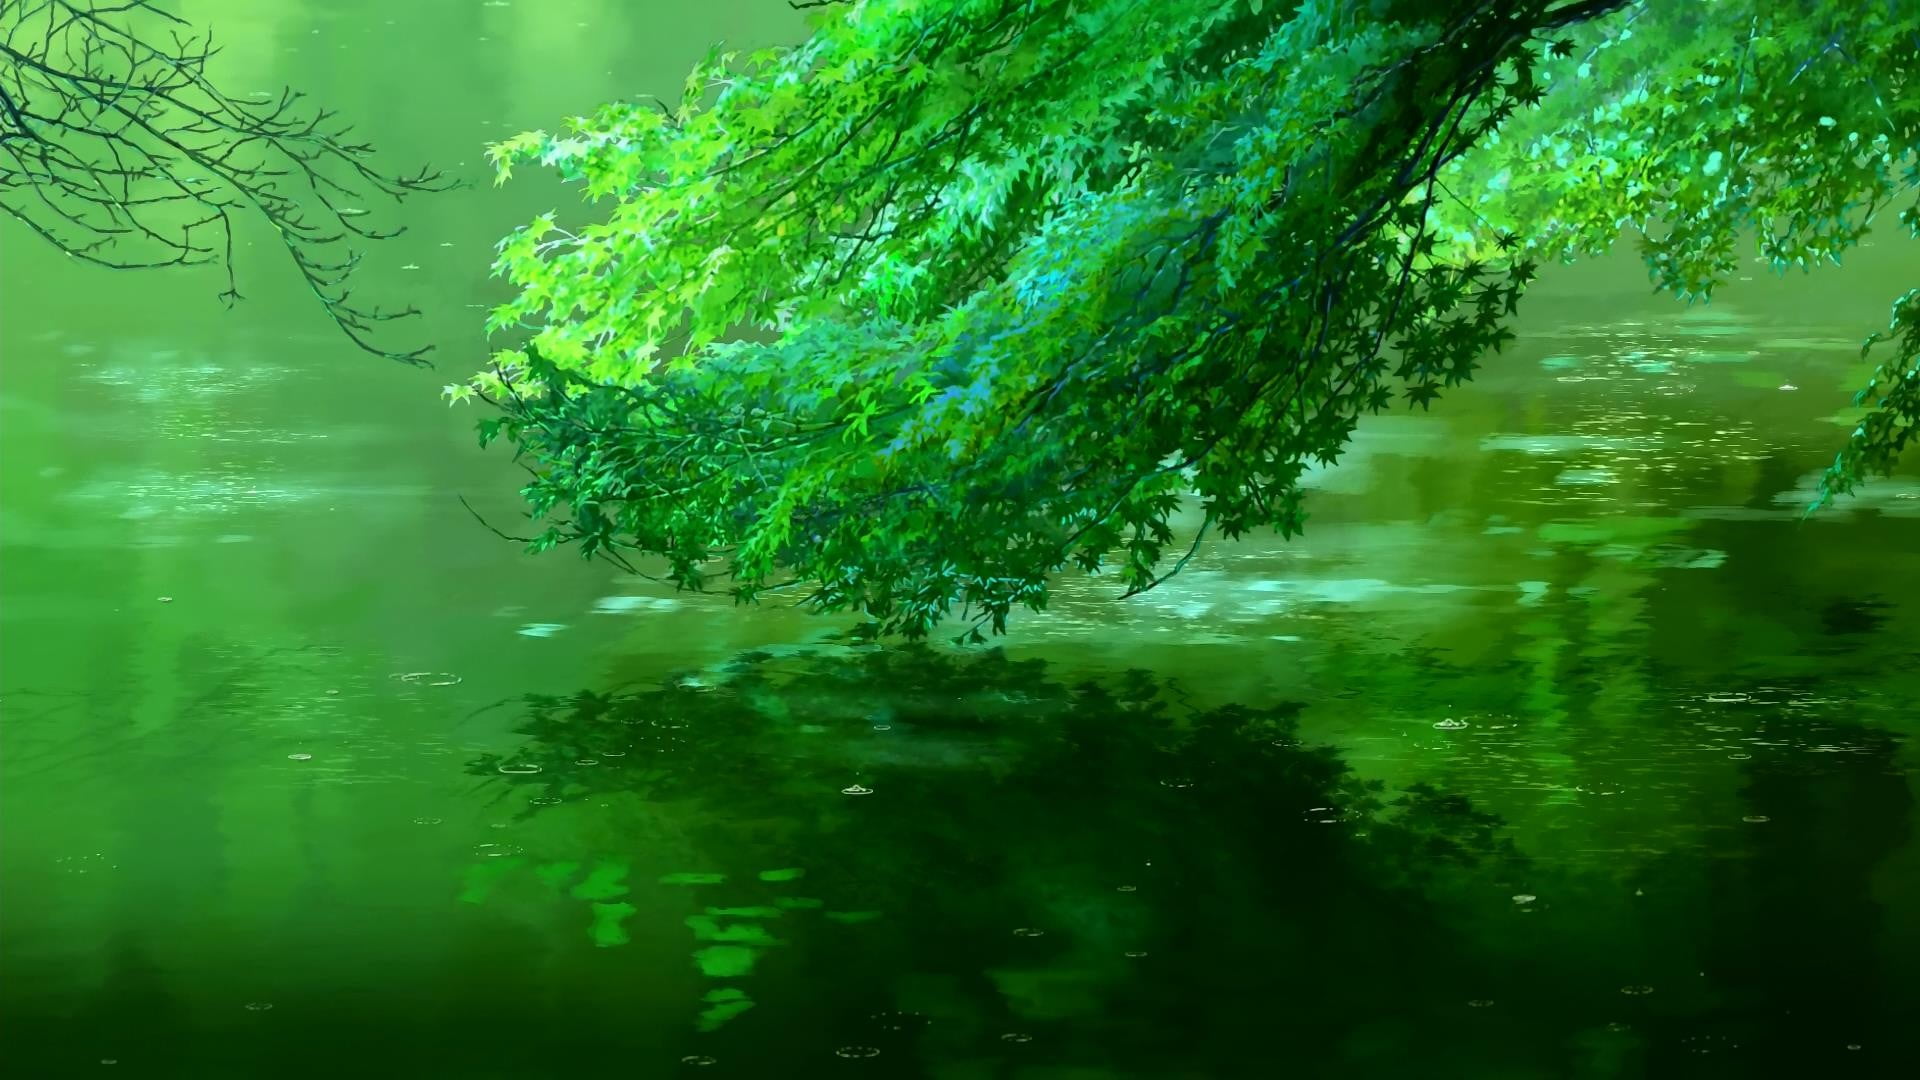 green trees, green leafed plants over body of water, fantasy art